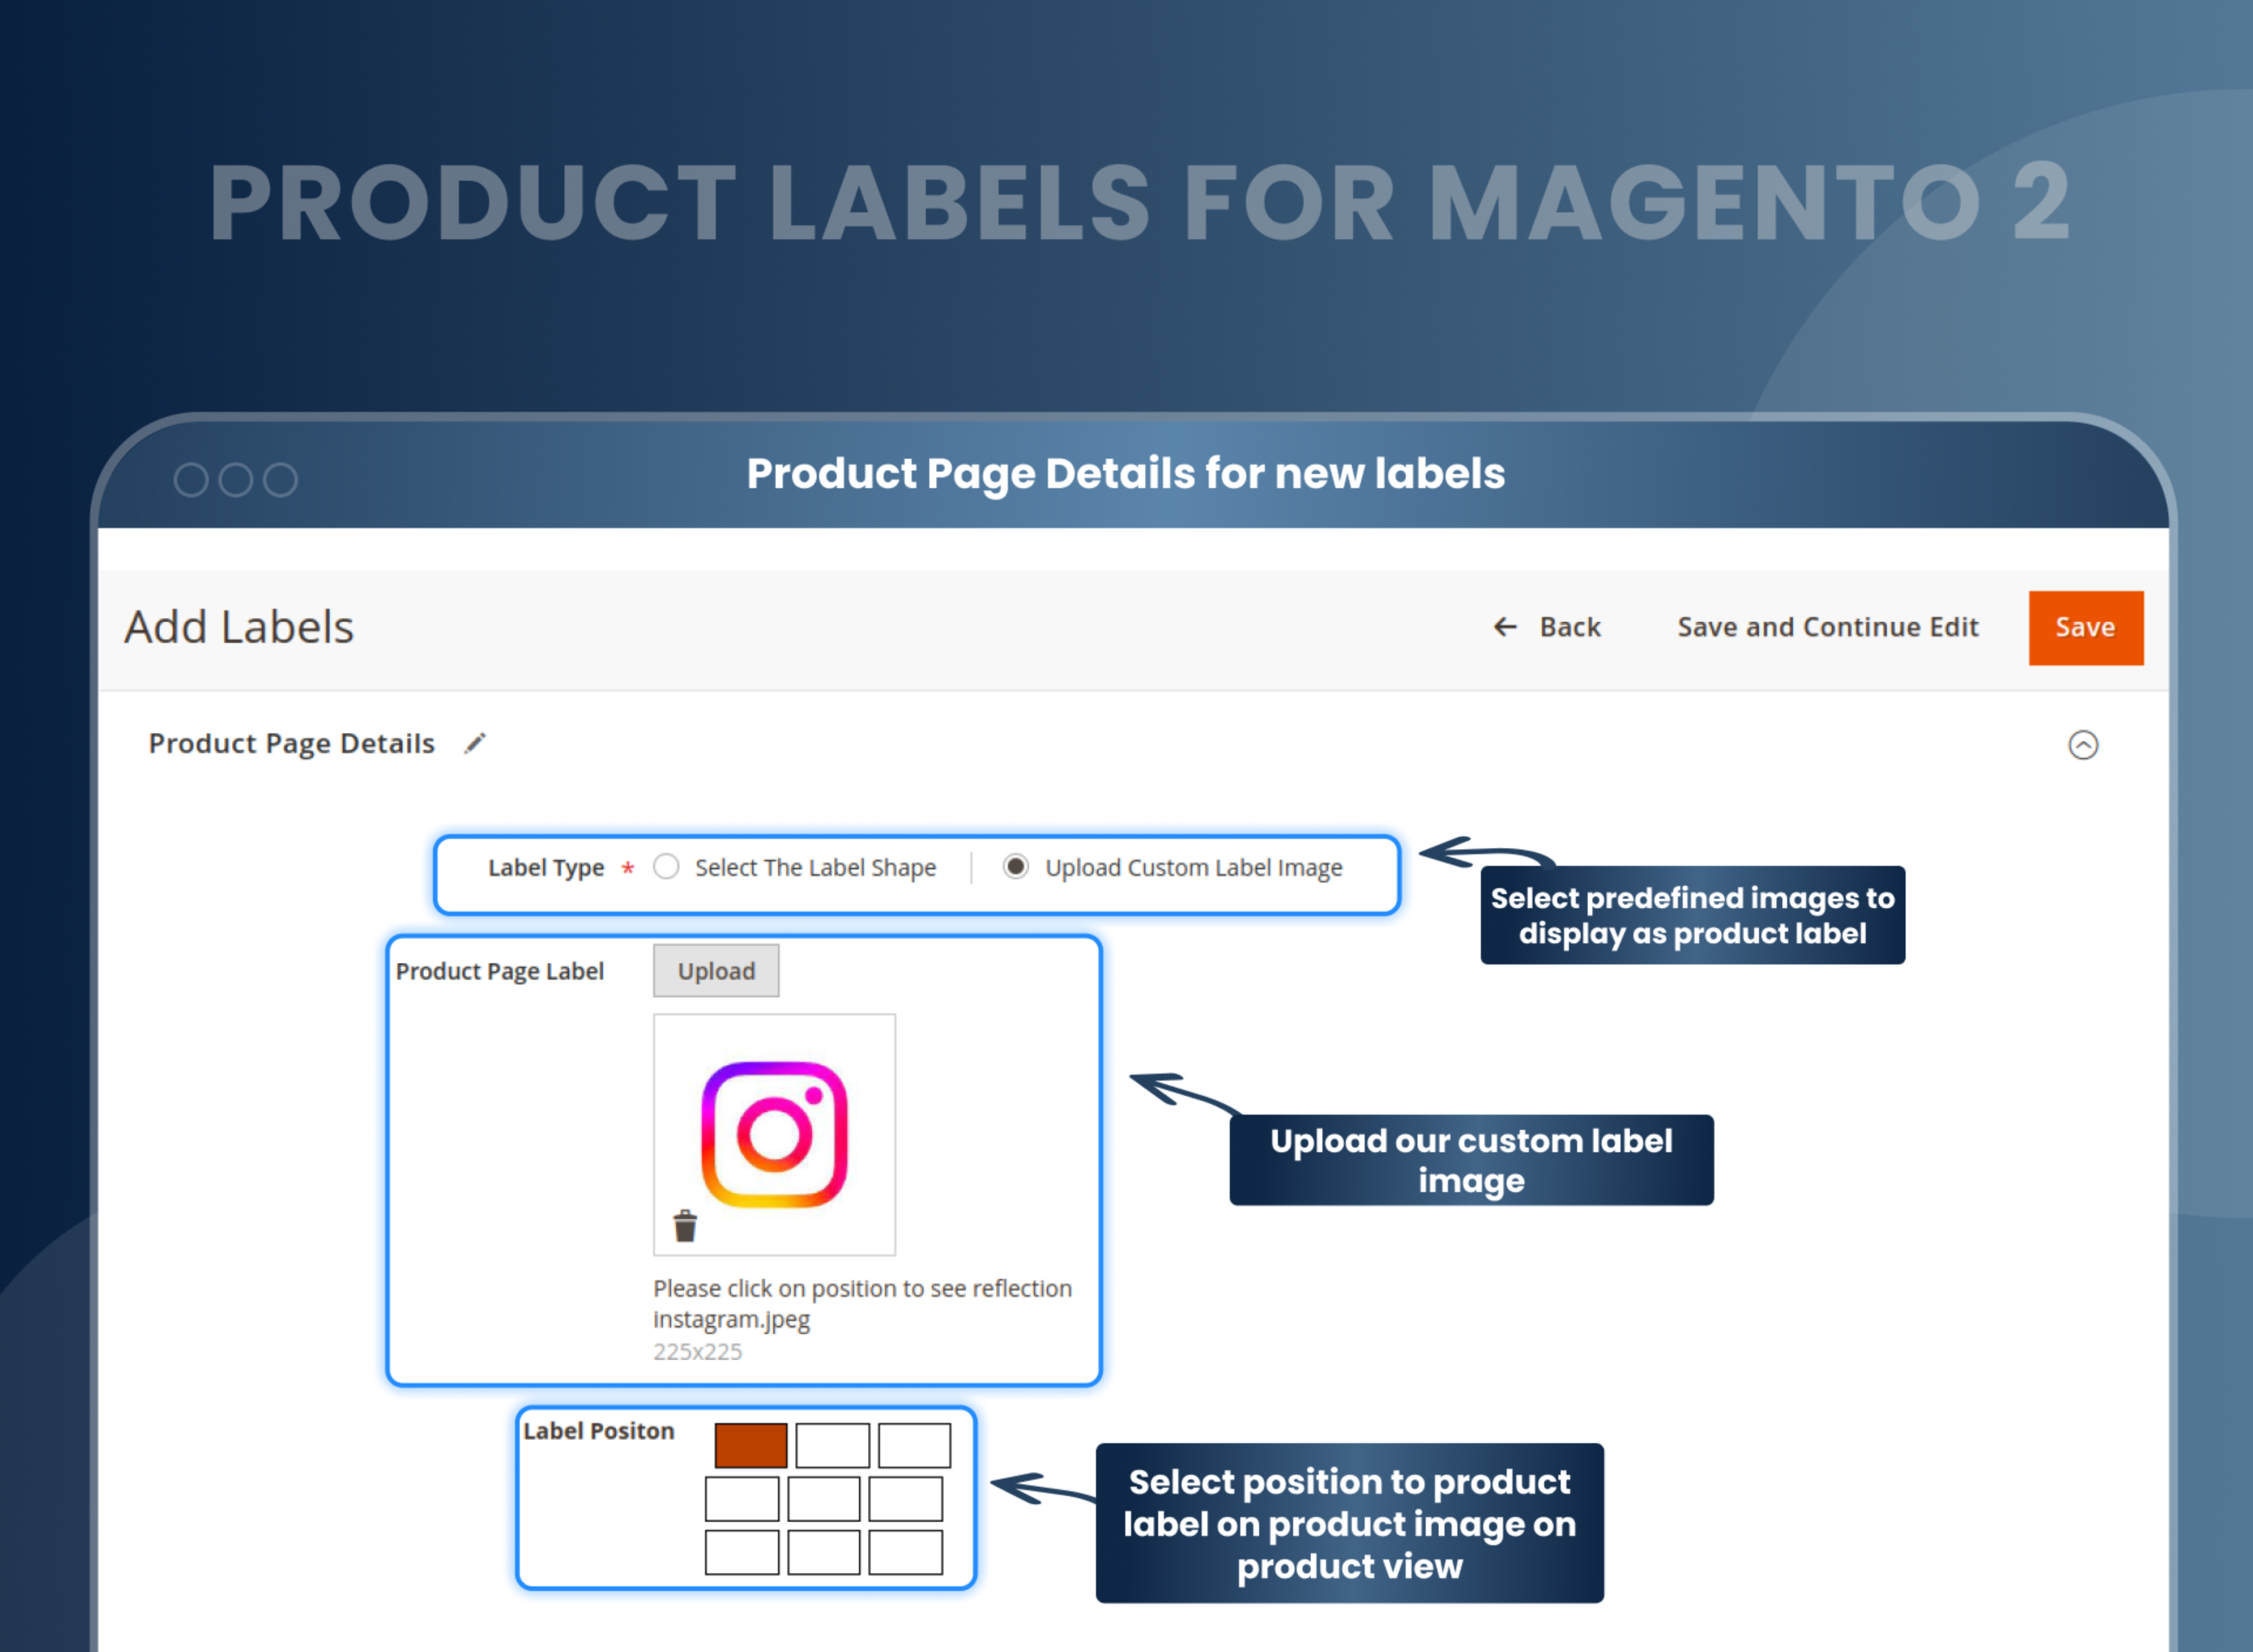 Product Page Details for new labels